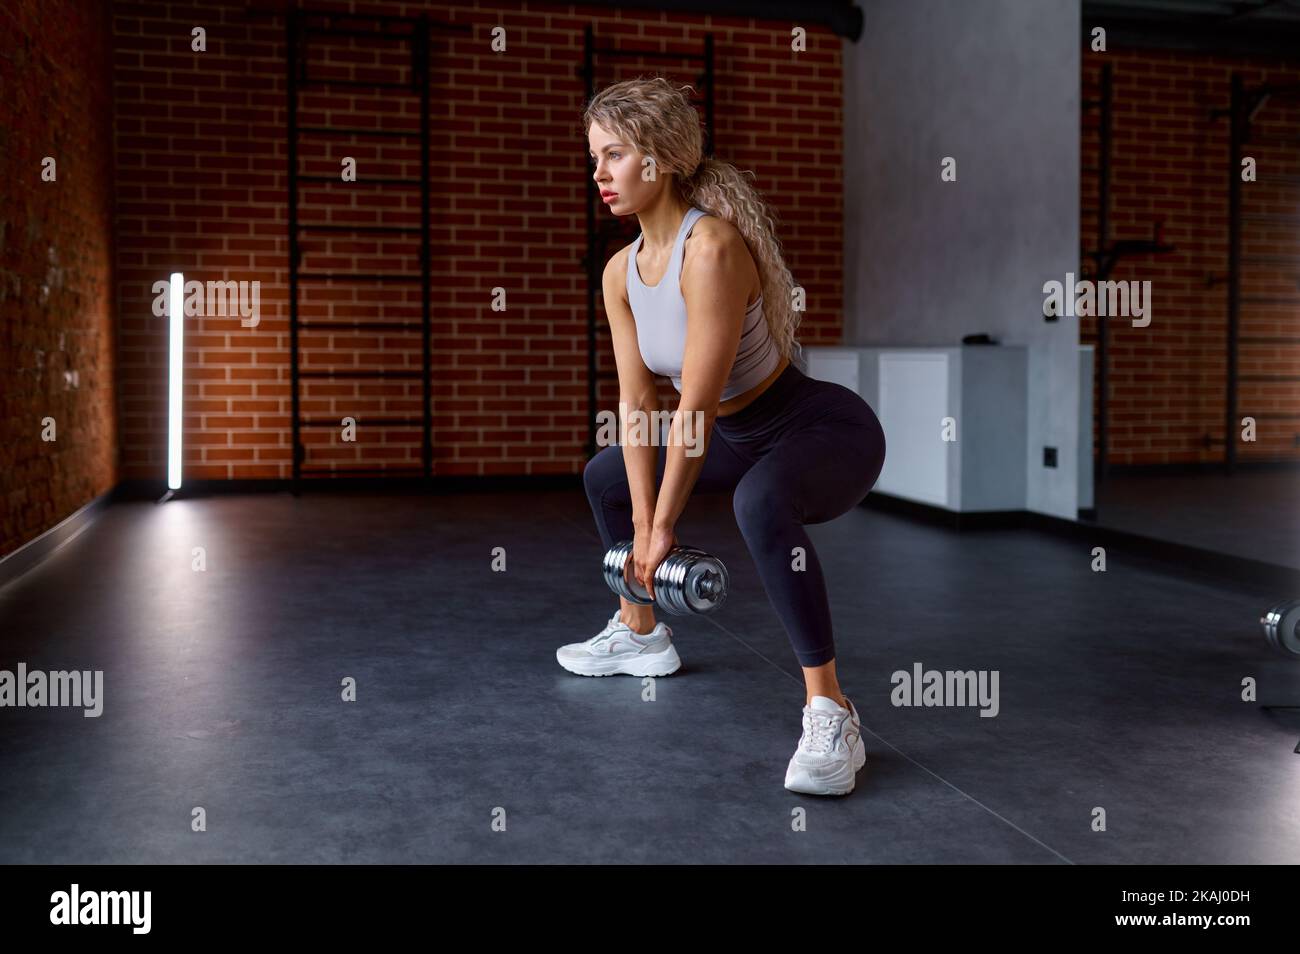 Woman training with dumbbells at gym club Stock Photo